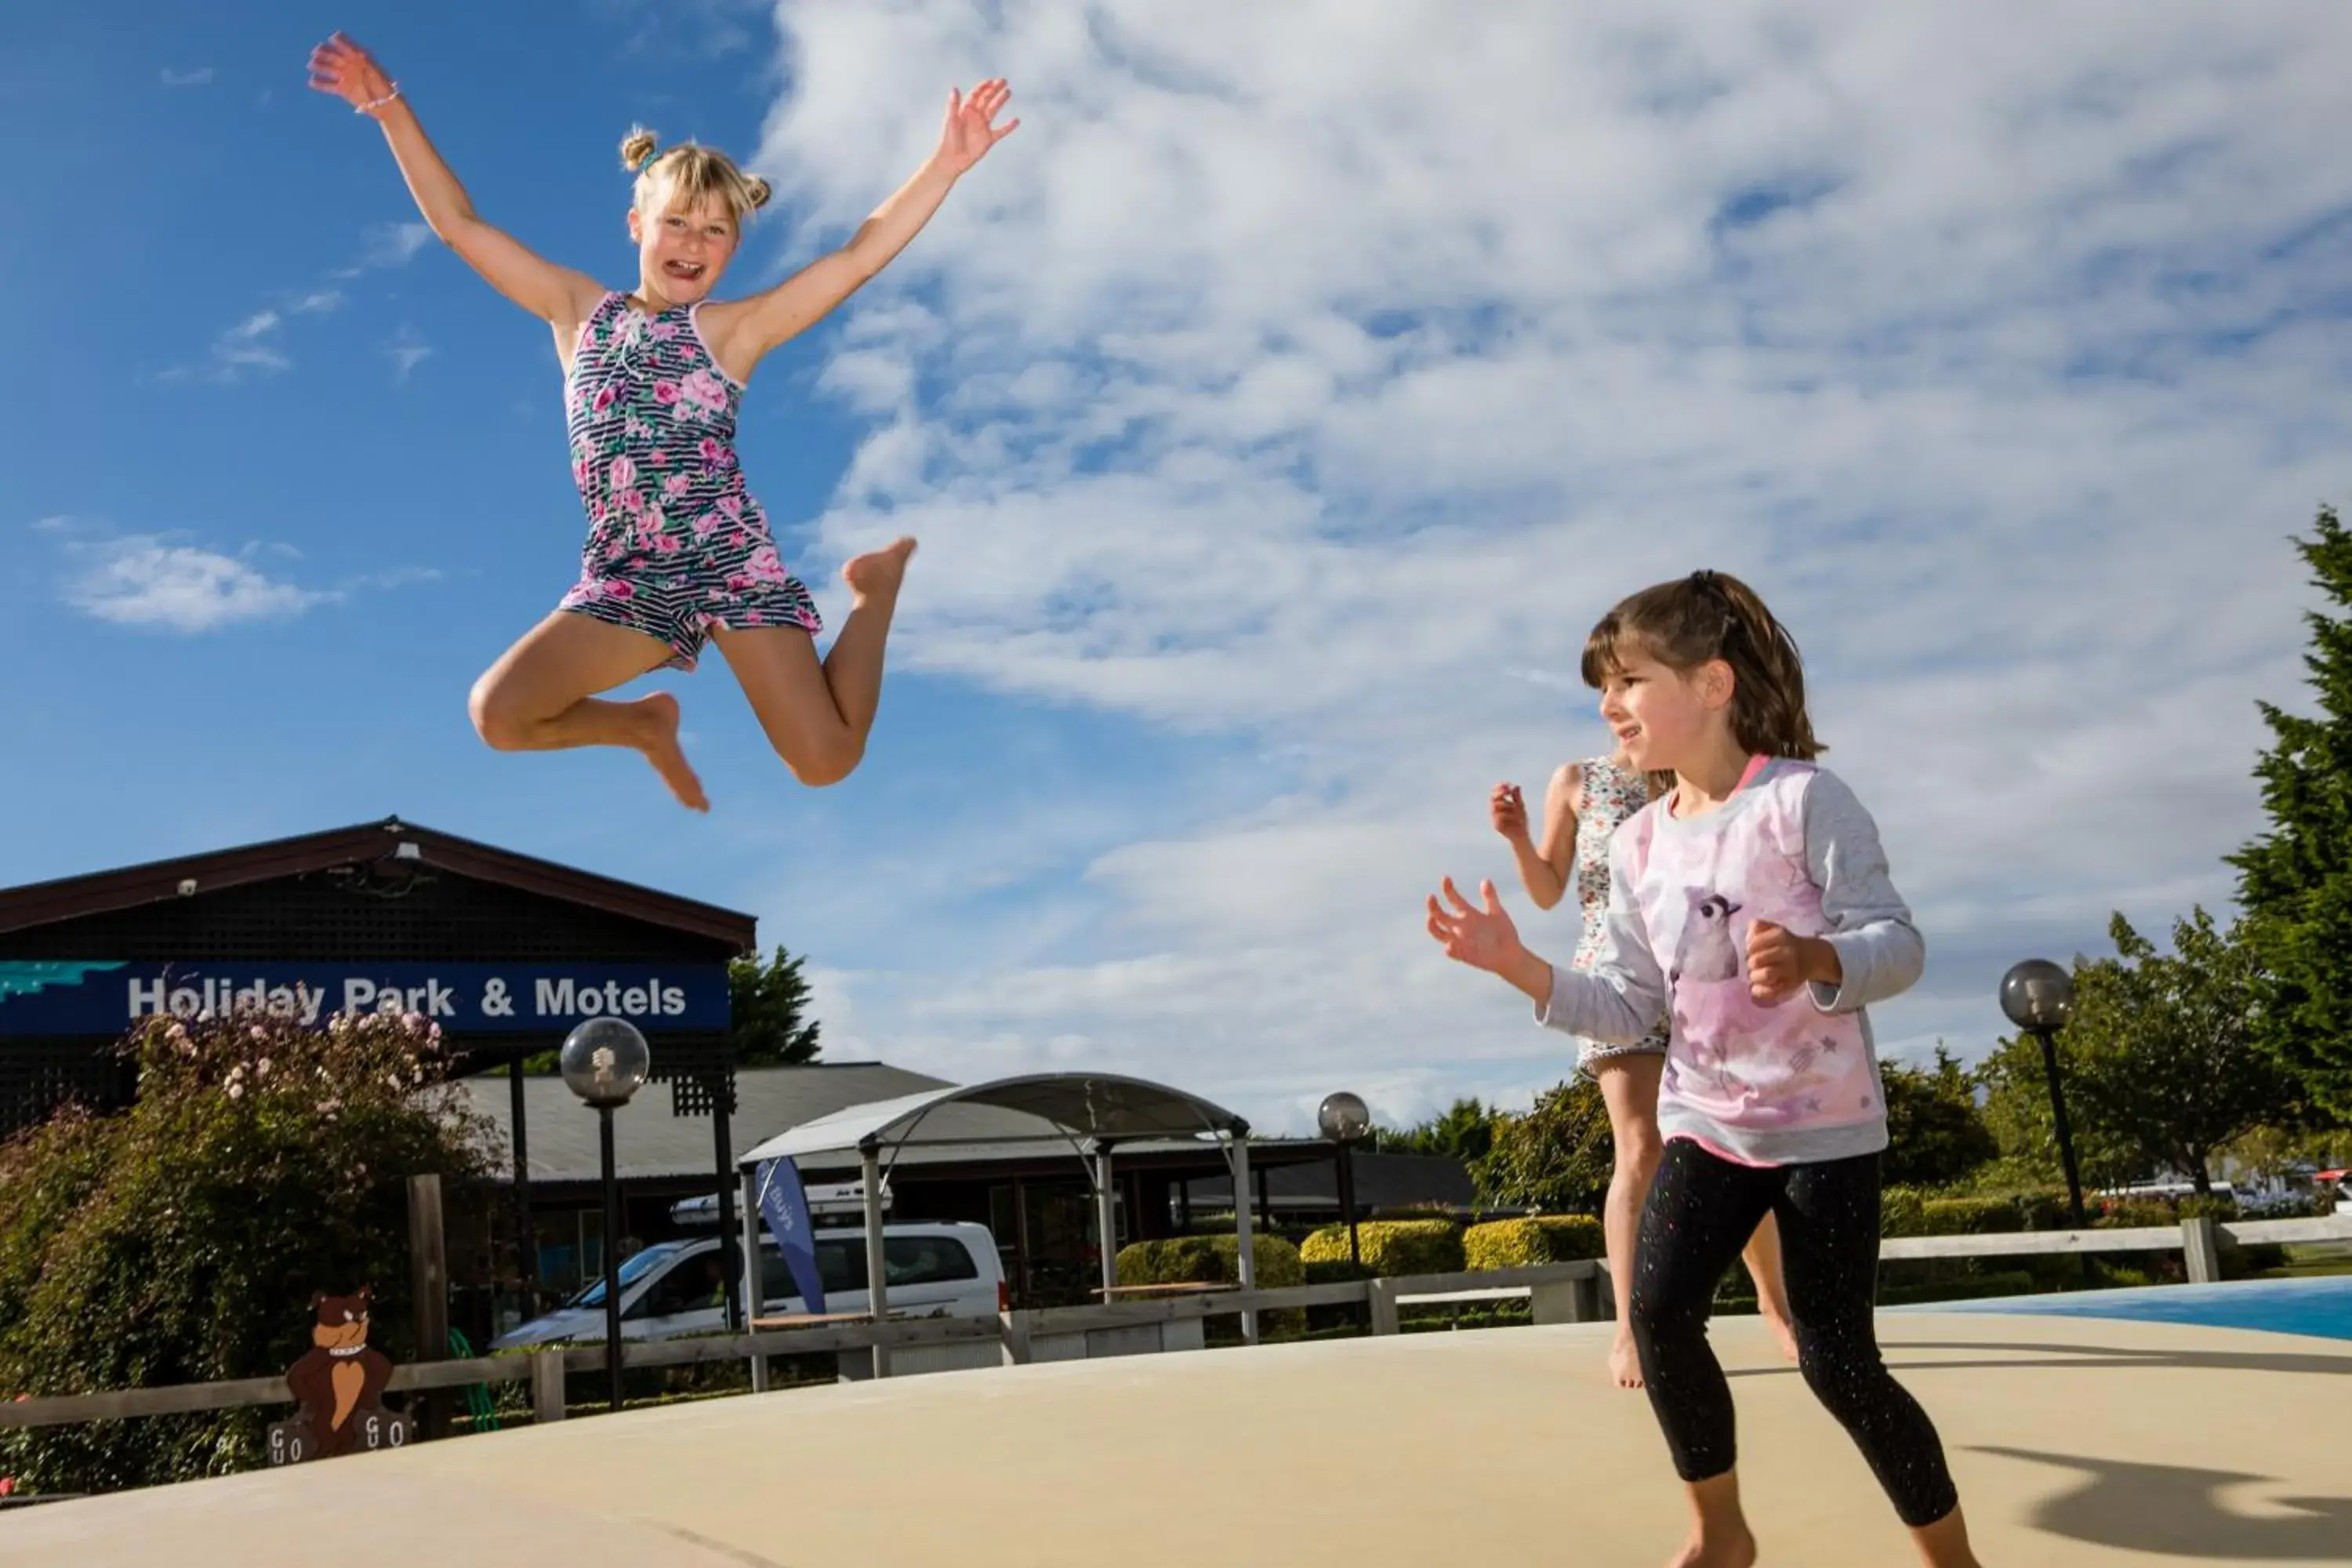 Children play ground in Te Anau Top 10 Holiday Park and Motels